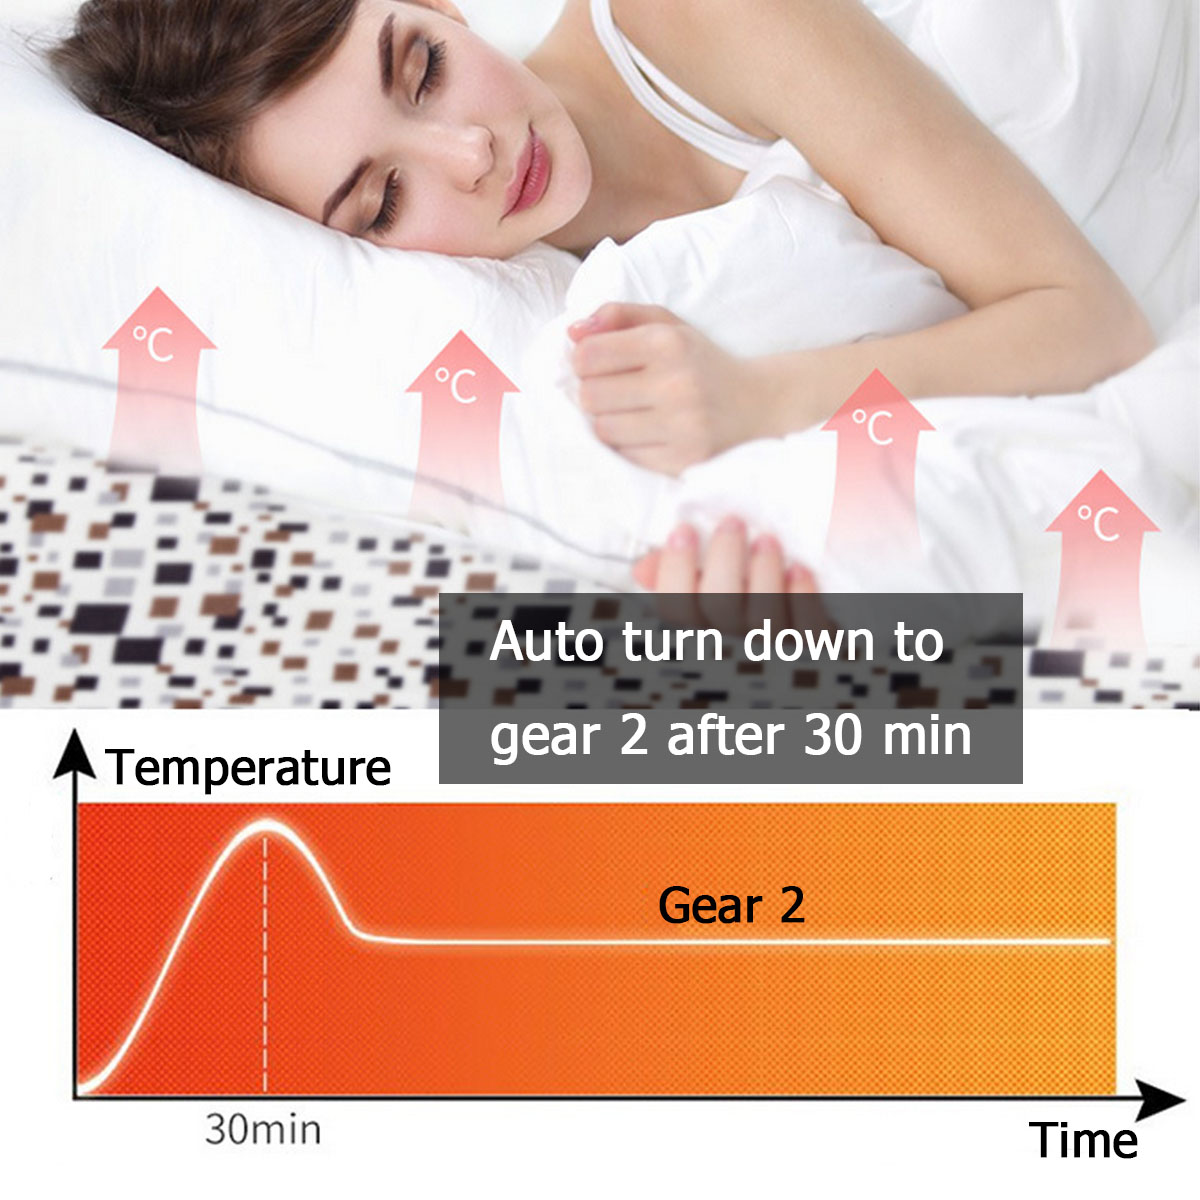 Electric-Heated-Blankets-of-Grid-Model--with-Timing-Function-Plus-Size-Bed--LED-Screen-1527569